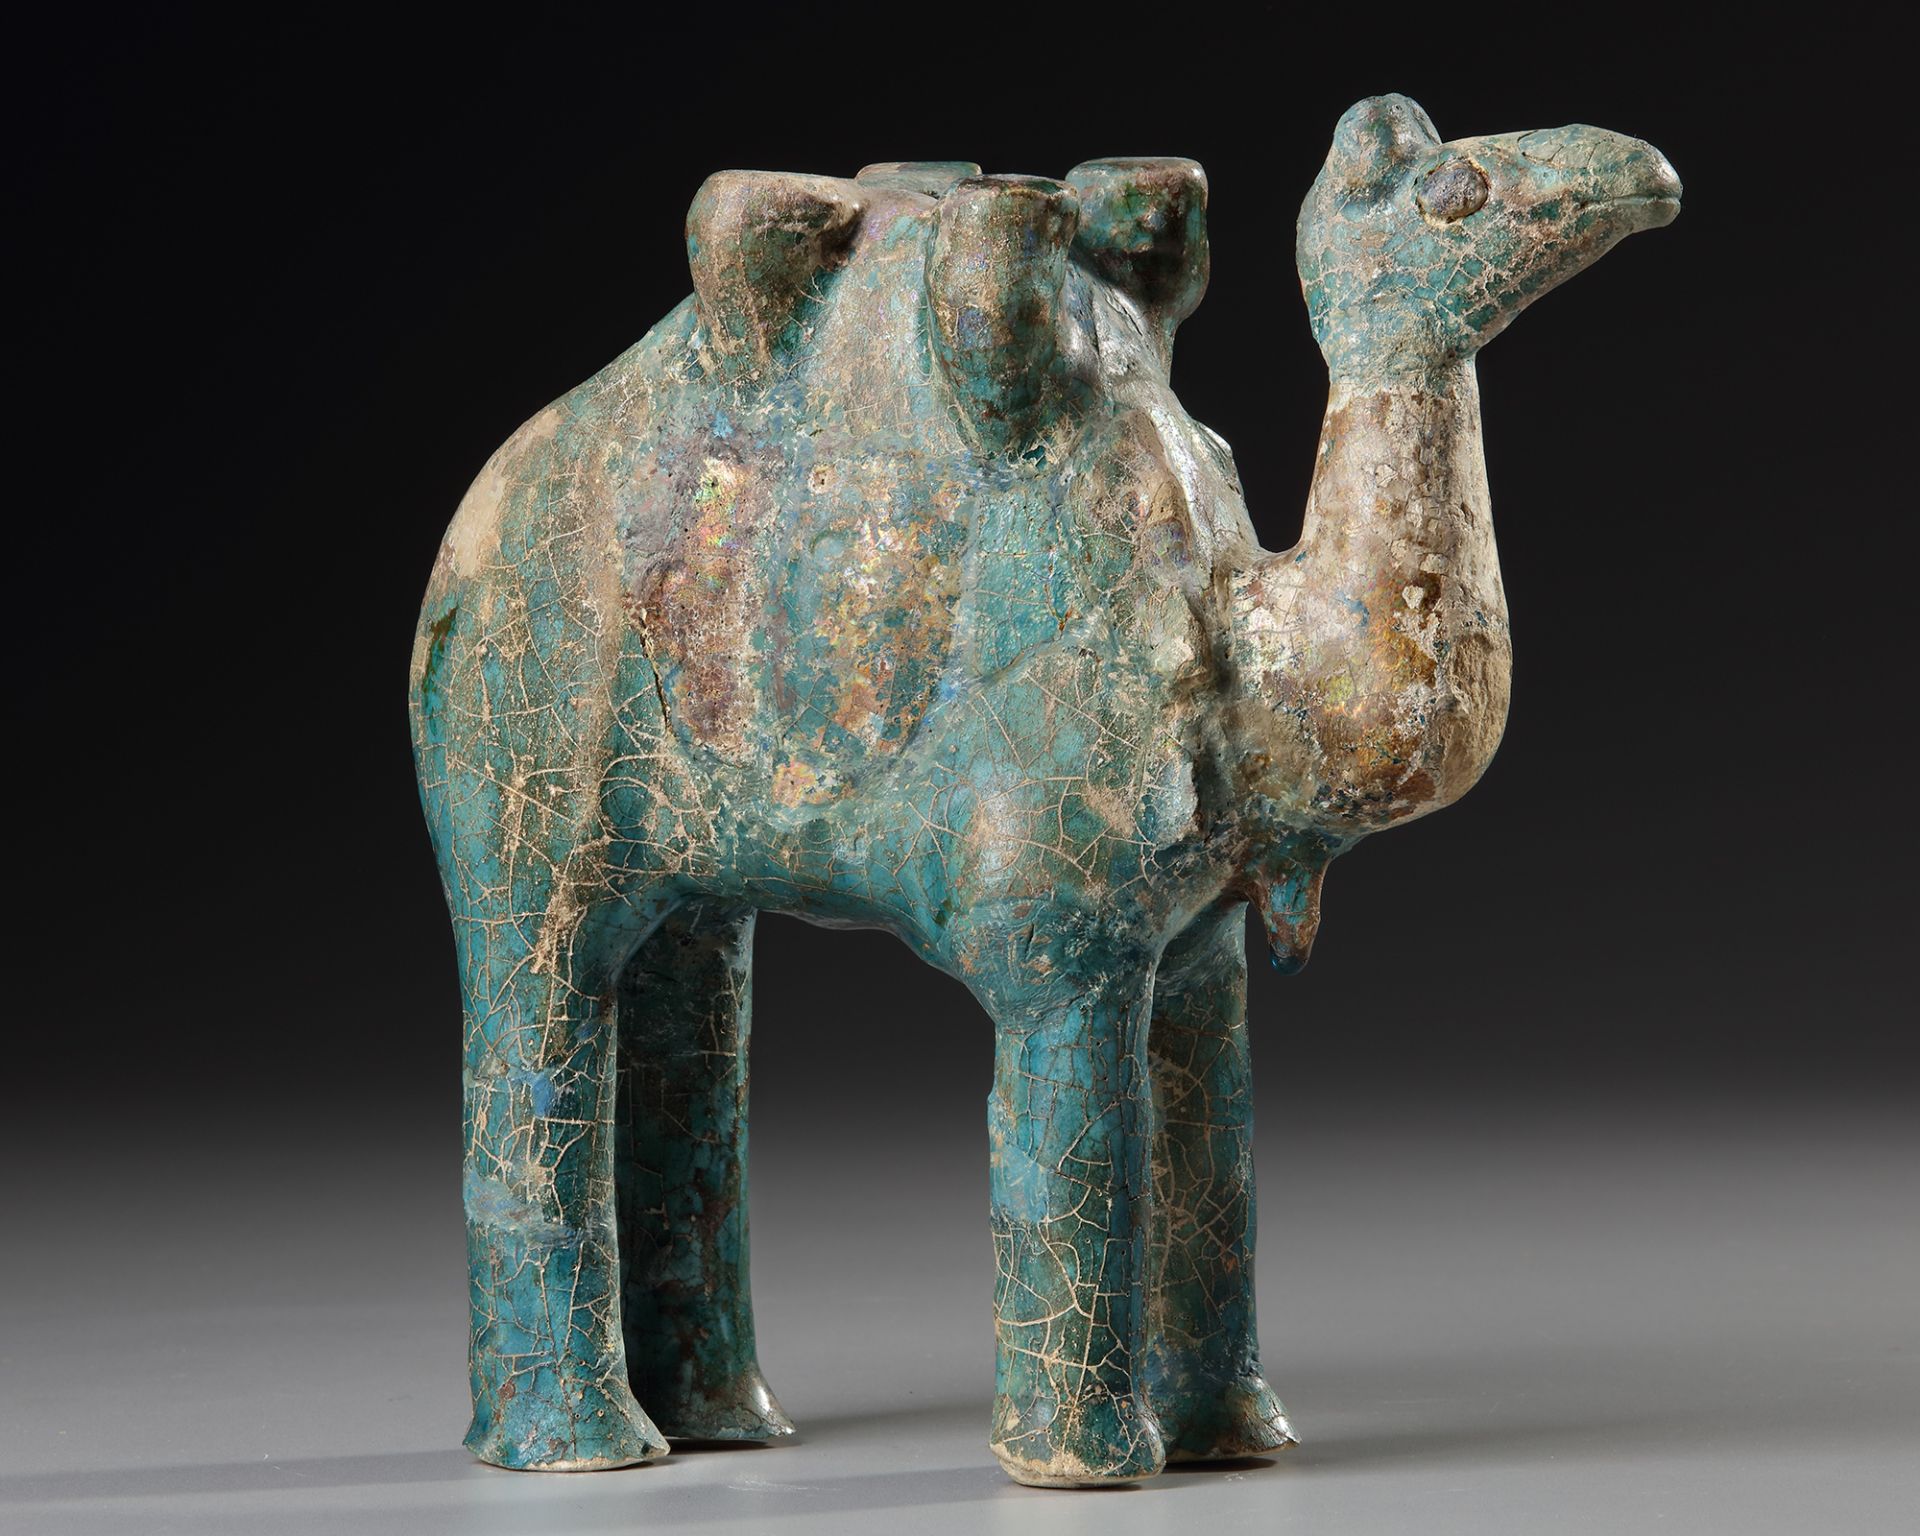 A TURQUOISE GLAZED POTTERY FIGURE OF A CAMEL, KASHAN, PERSIA, 11TH-12TH CENTURY - Image 3 of 4